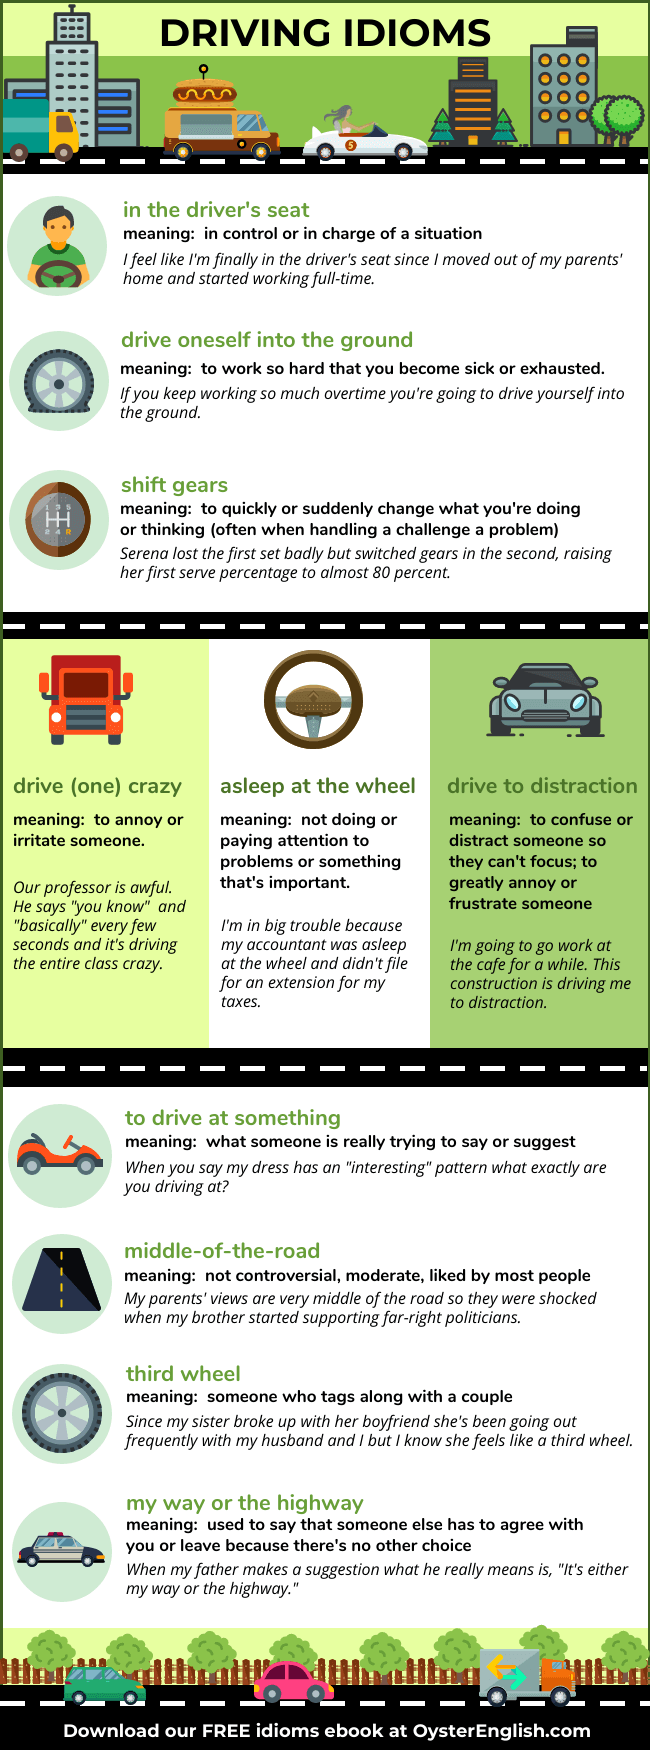 An infographic with 10 driving idioms featured on this web page, with definitions and sentence examples